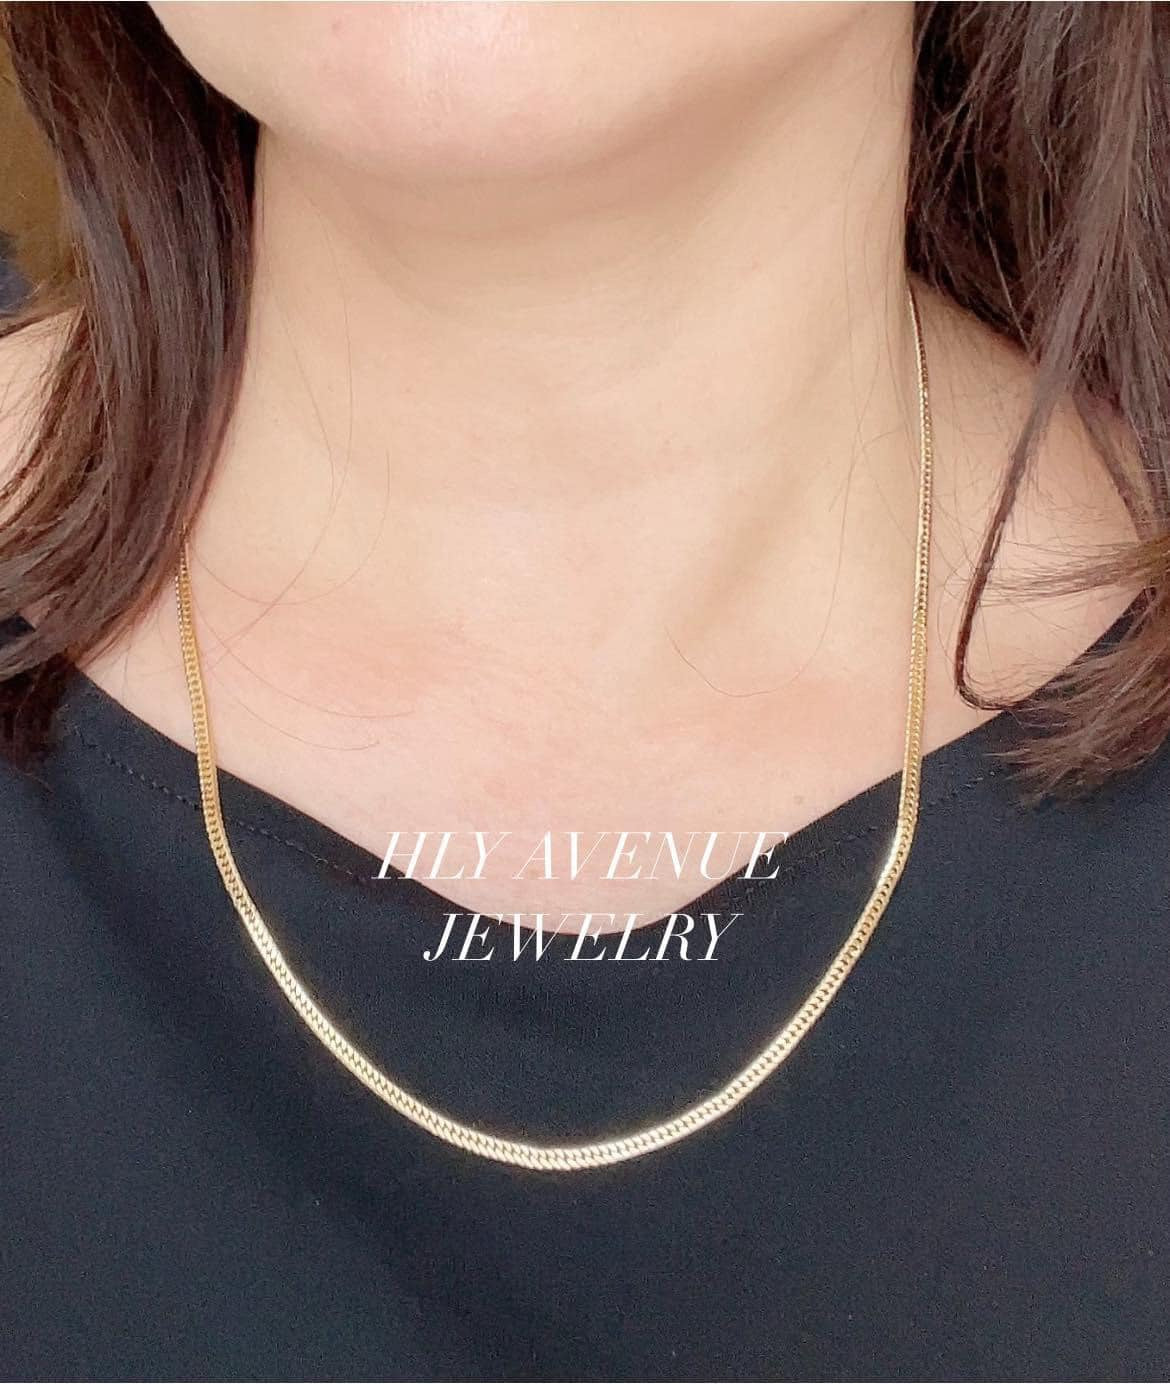 18k Japan Gold 6 Double Cut Kihei Necklace 50cm Hly Avenue Jewelry